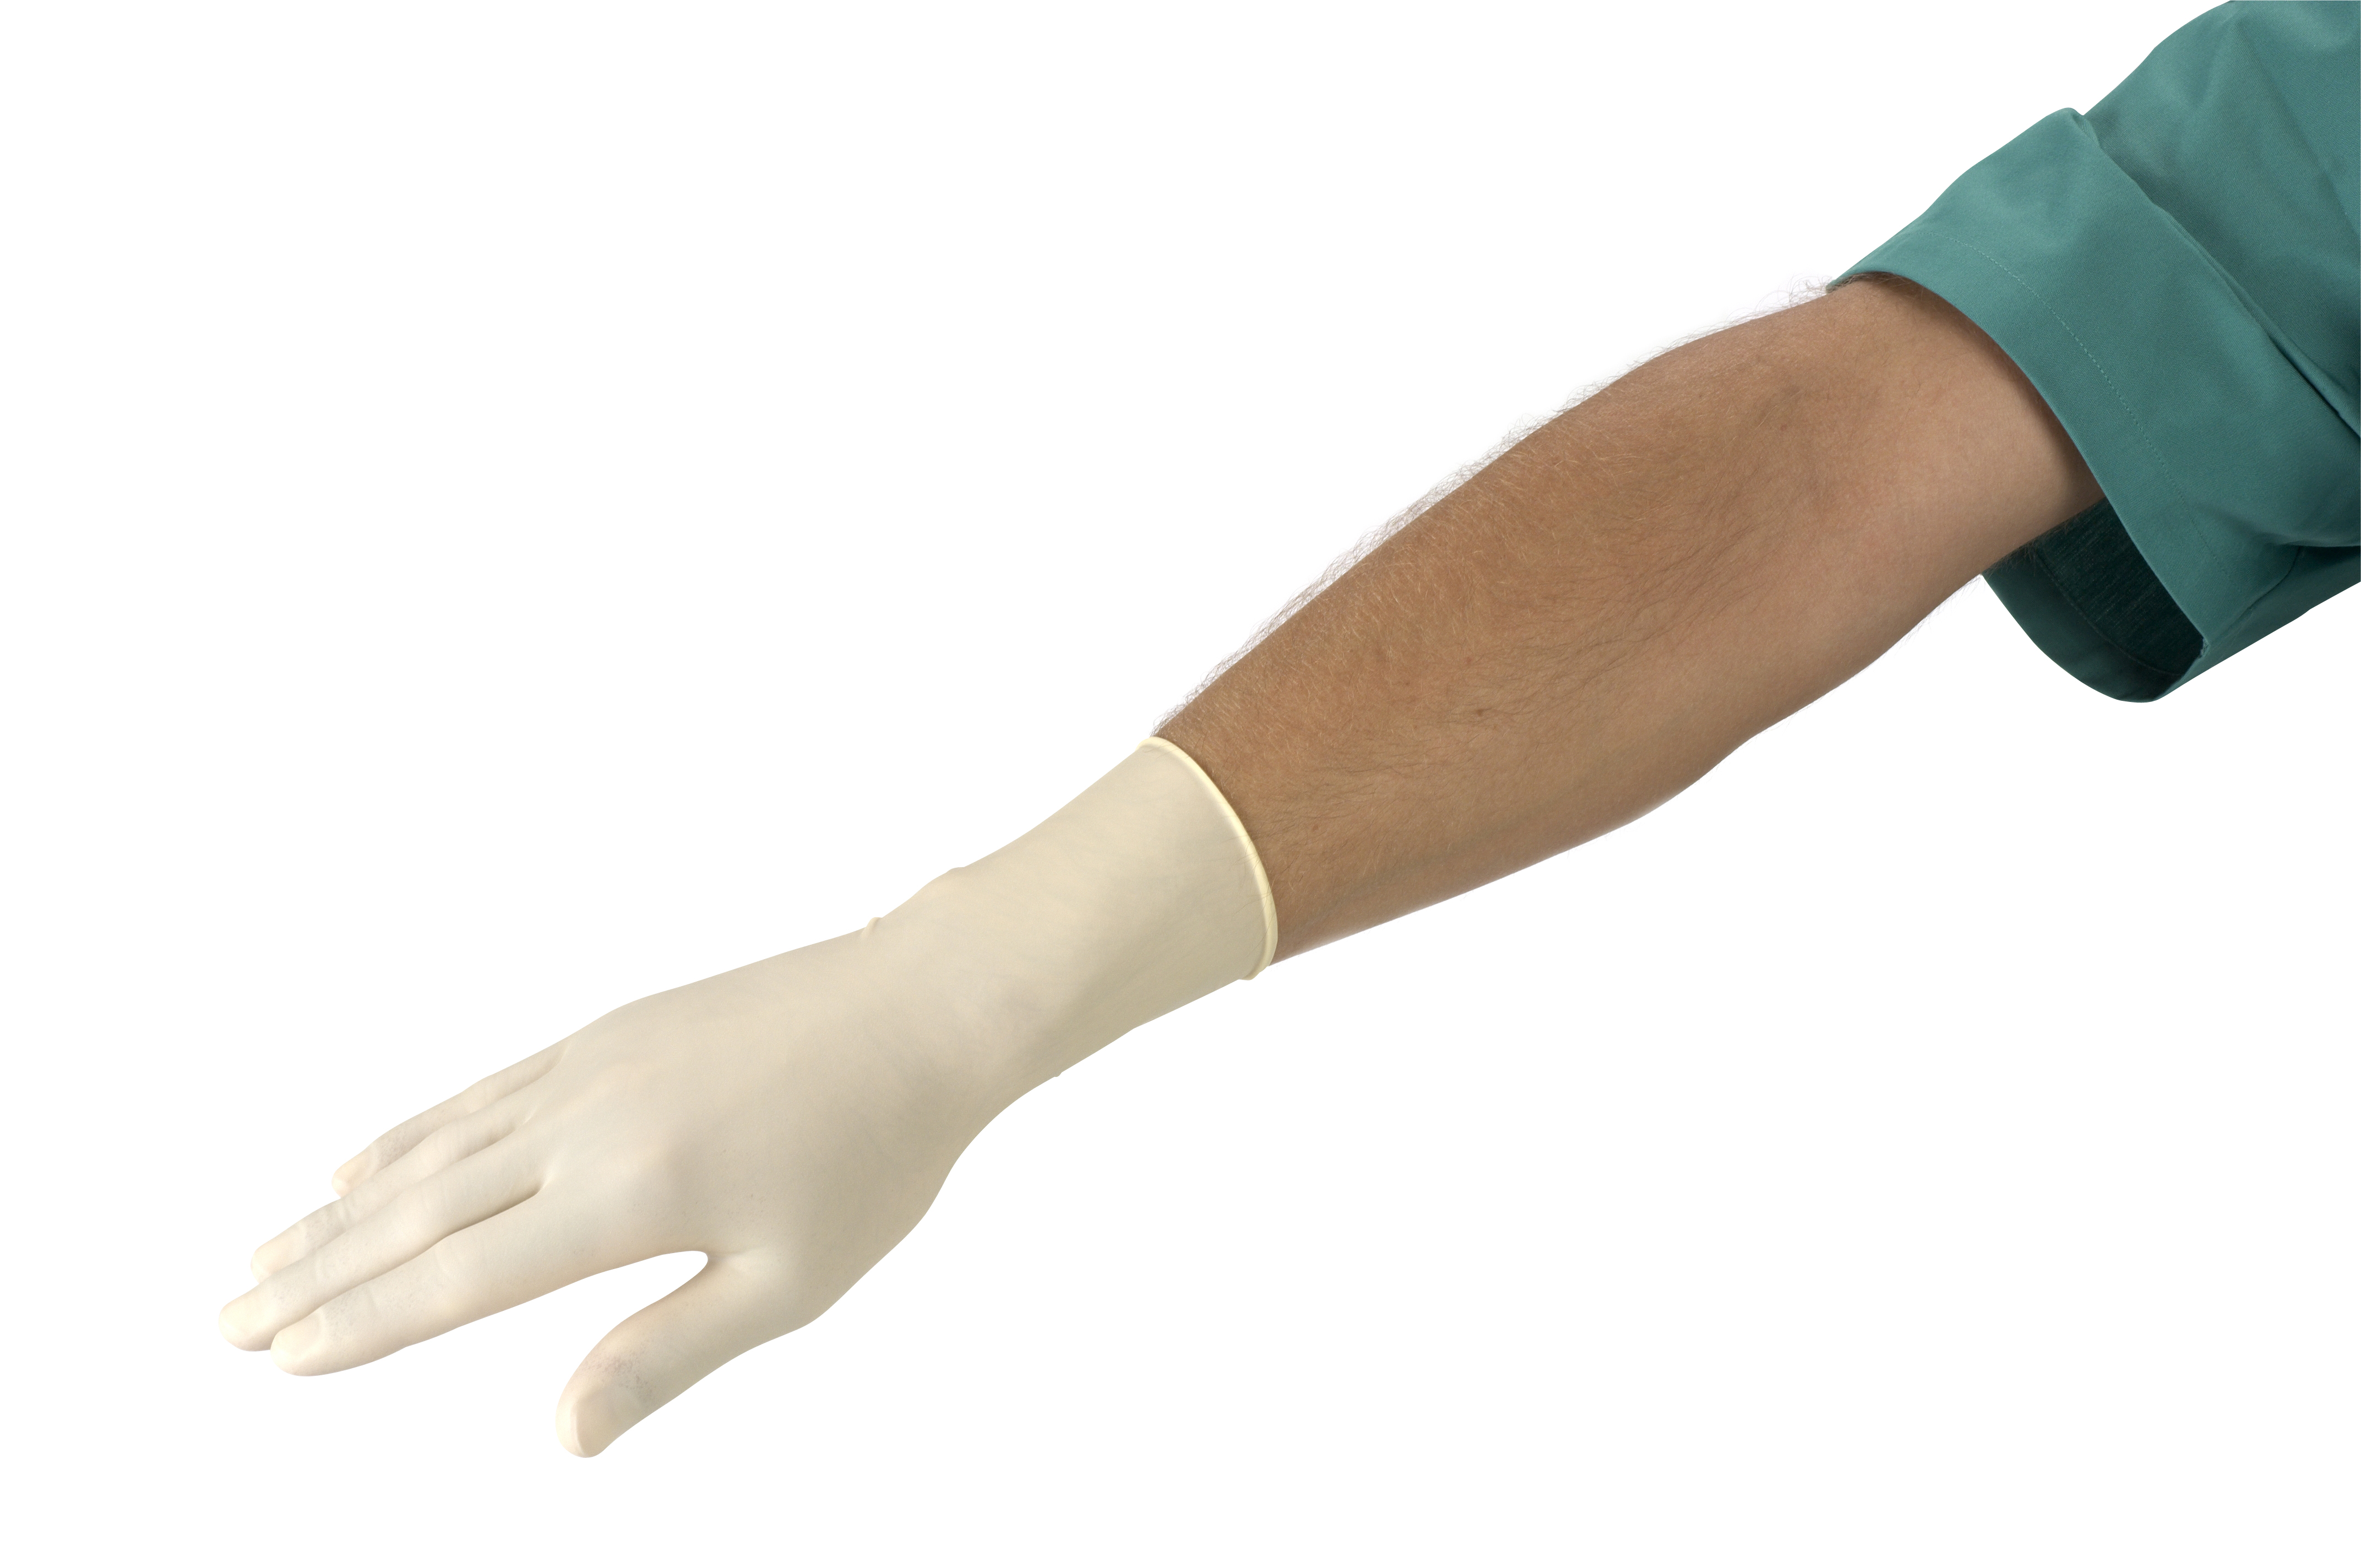 US -KRUTEX surgical gloves PF size 7.5, 50/pk